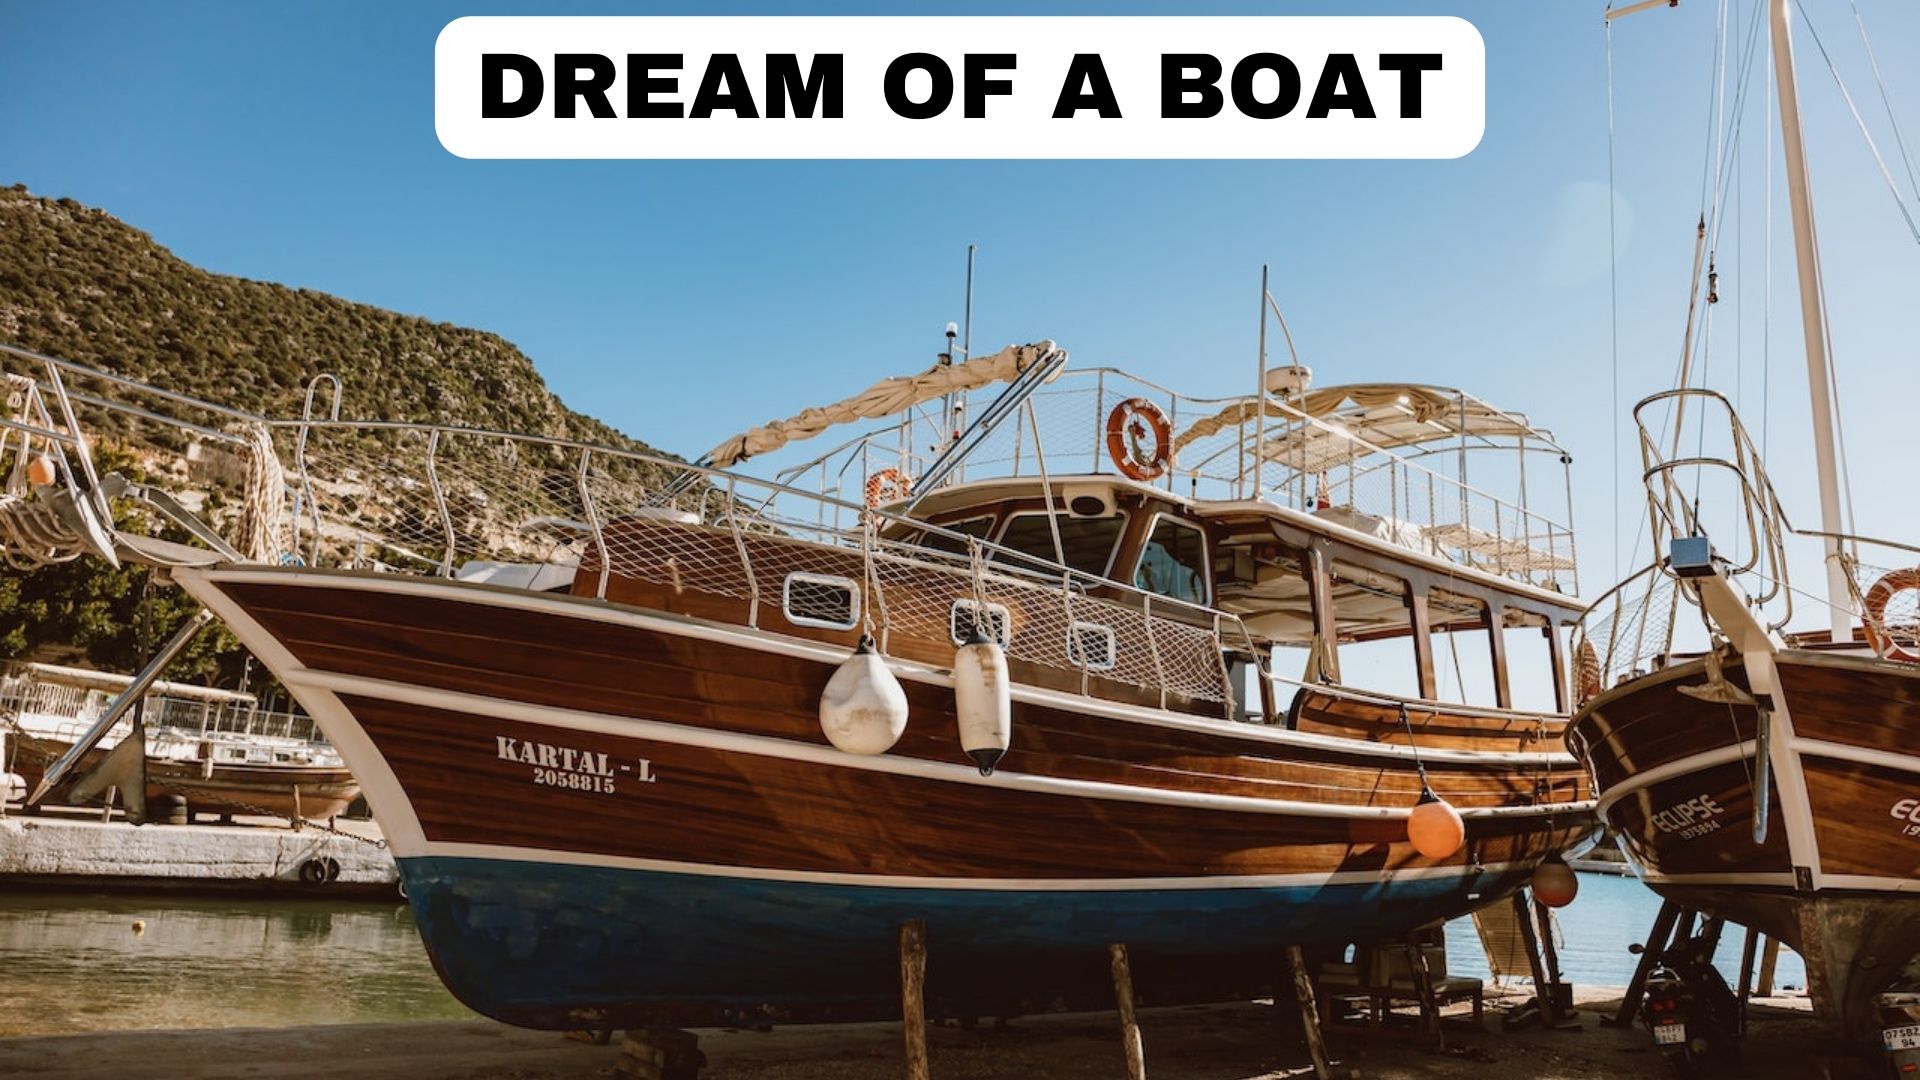 Dream Of A Boat - It Refers To A Spiritual Journey